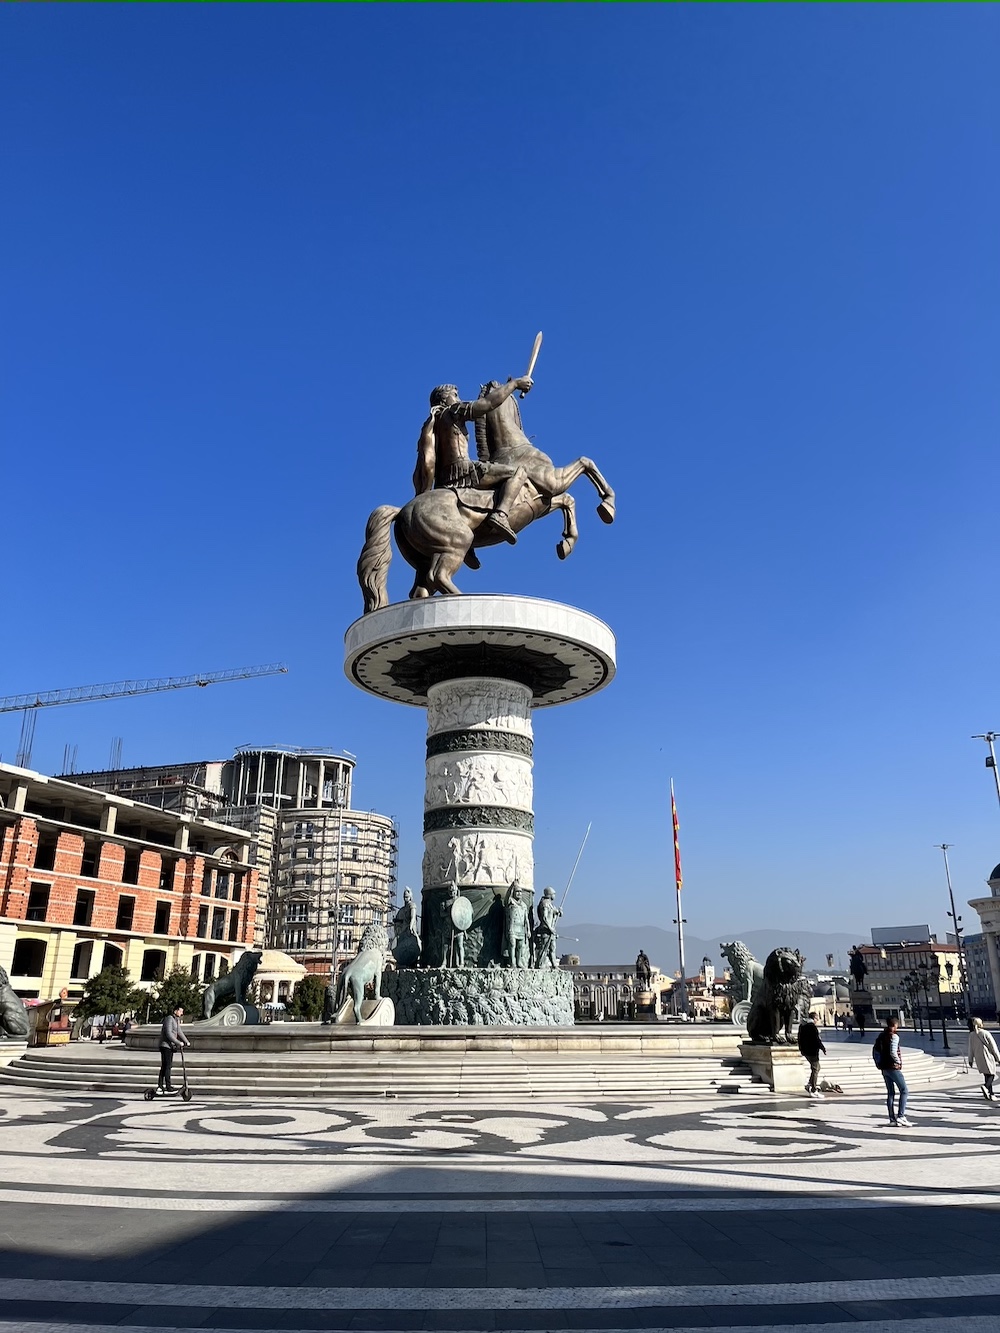 The Statue of Alexander the Great (called "Warrior on a Horse") in the main Macedonia square with blue skies. 